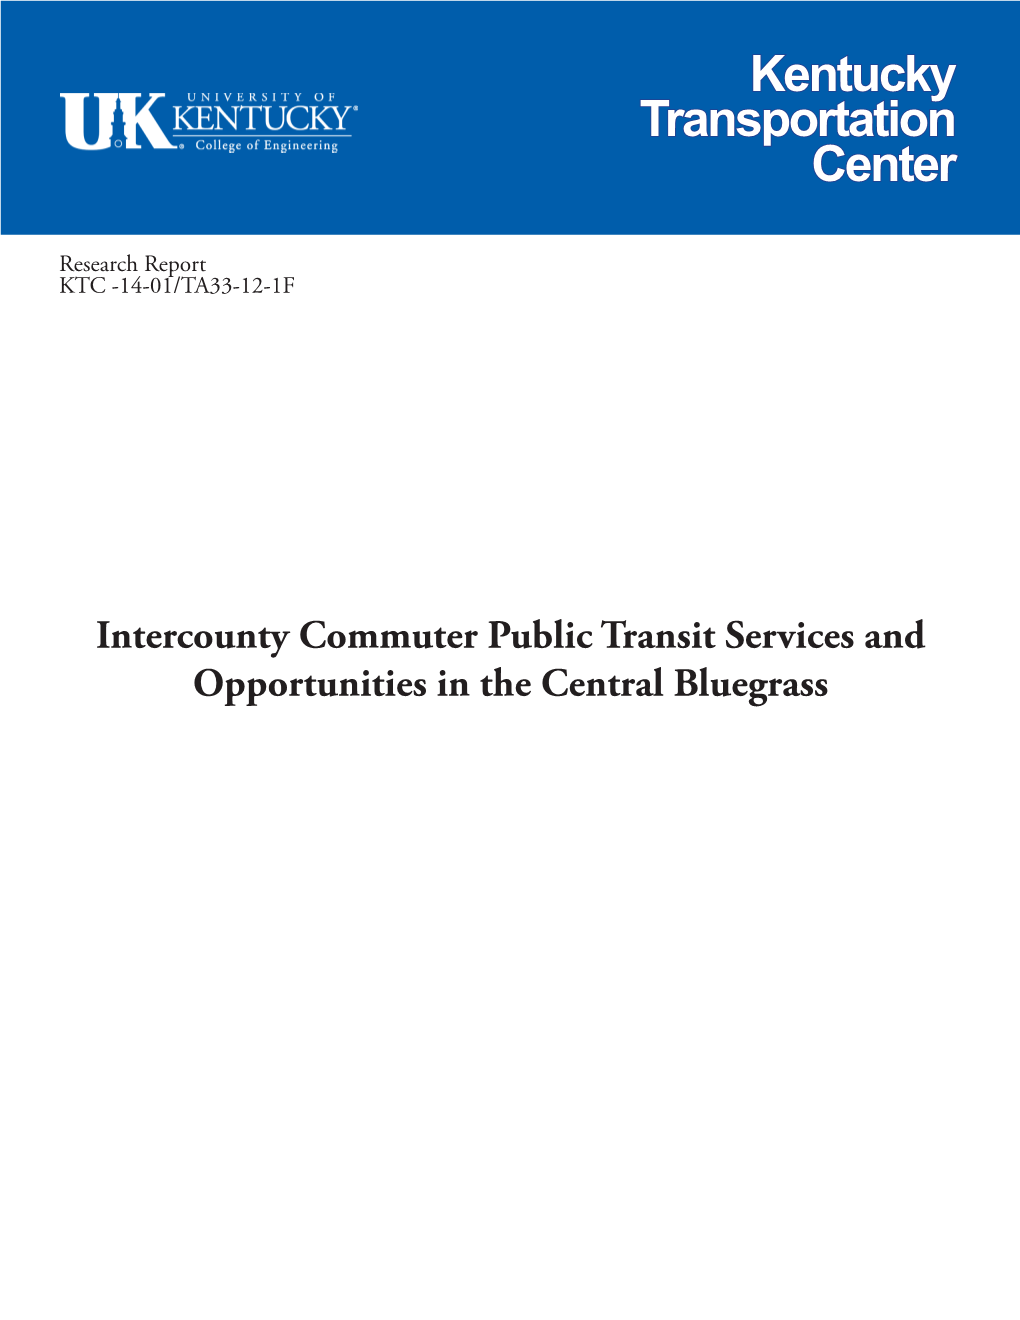 Intercounty Commuter Public Transit Services and Opportunities in the Central Bluegrass Our Mission